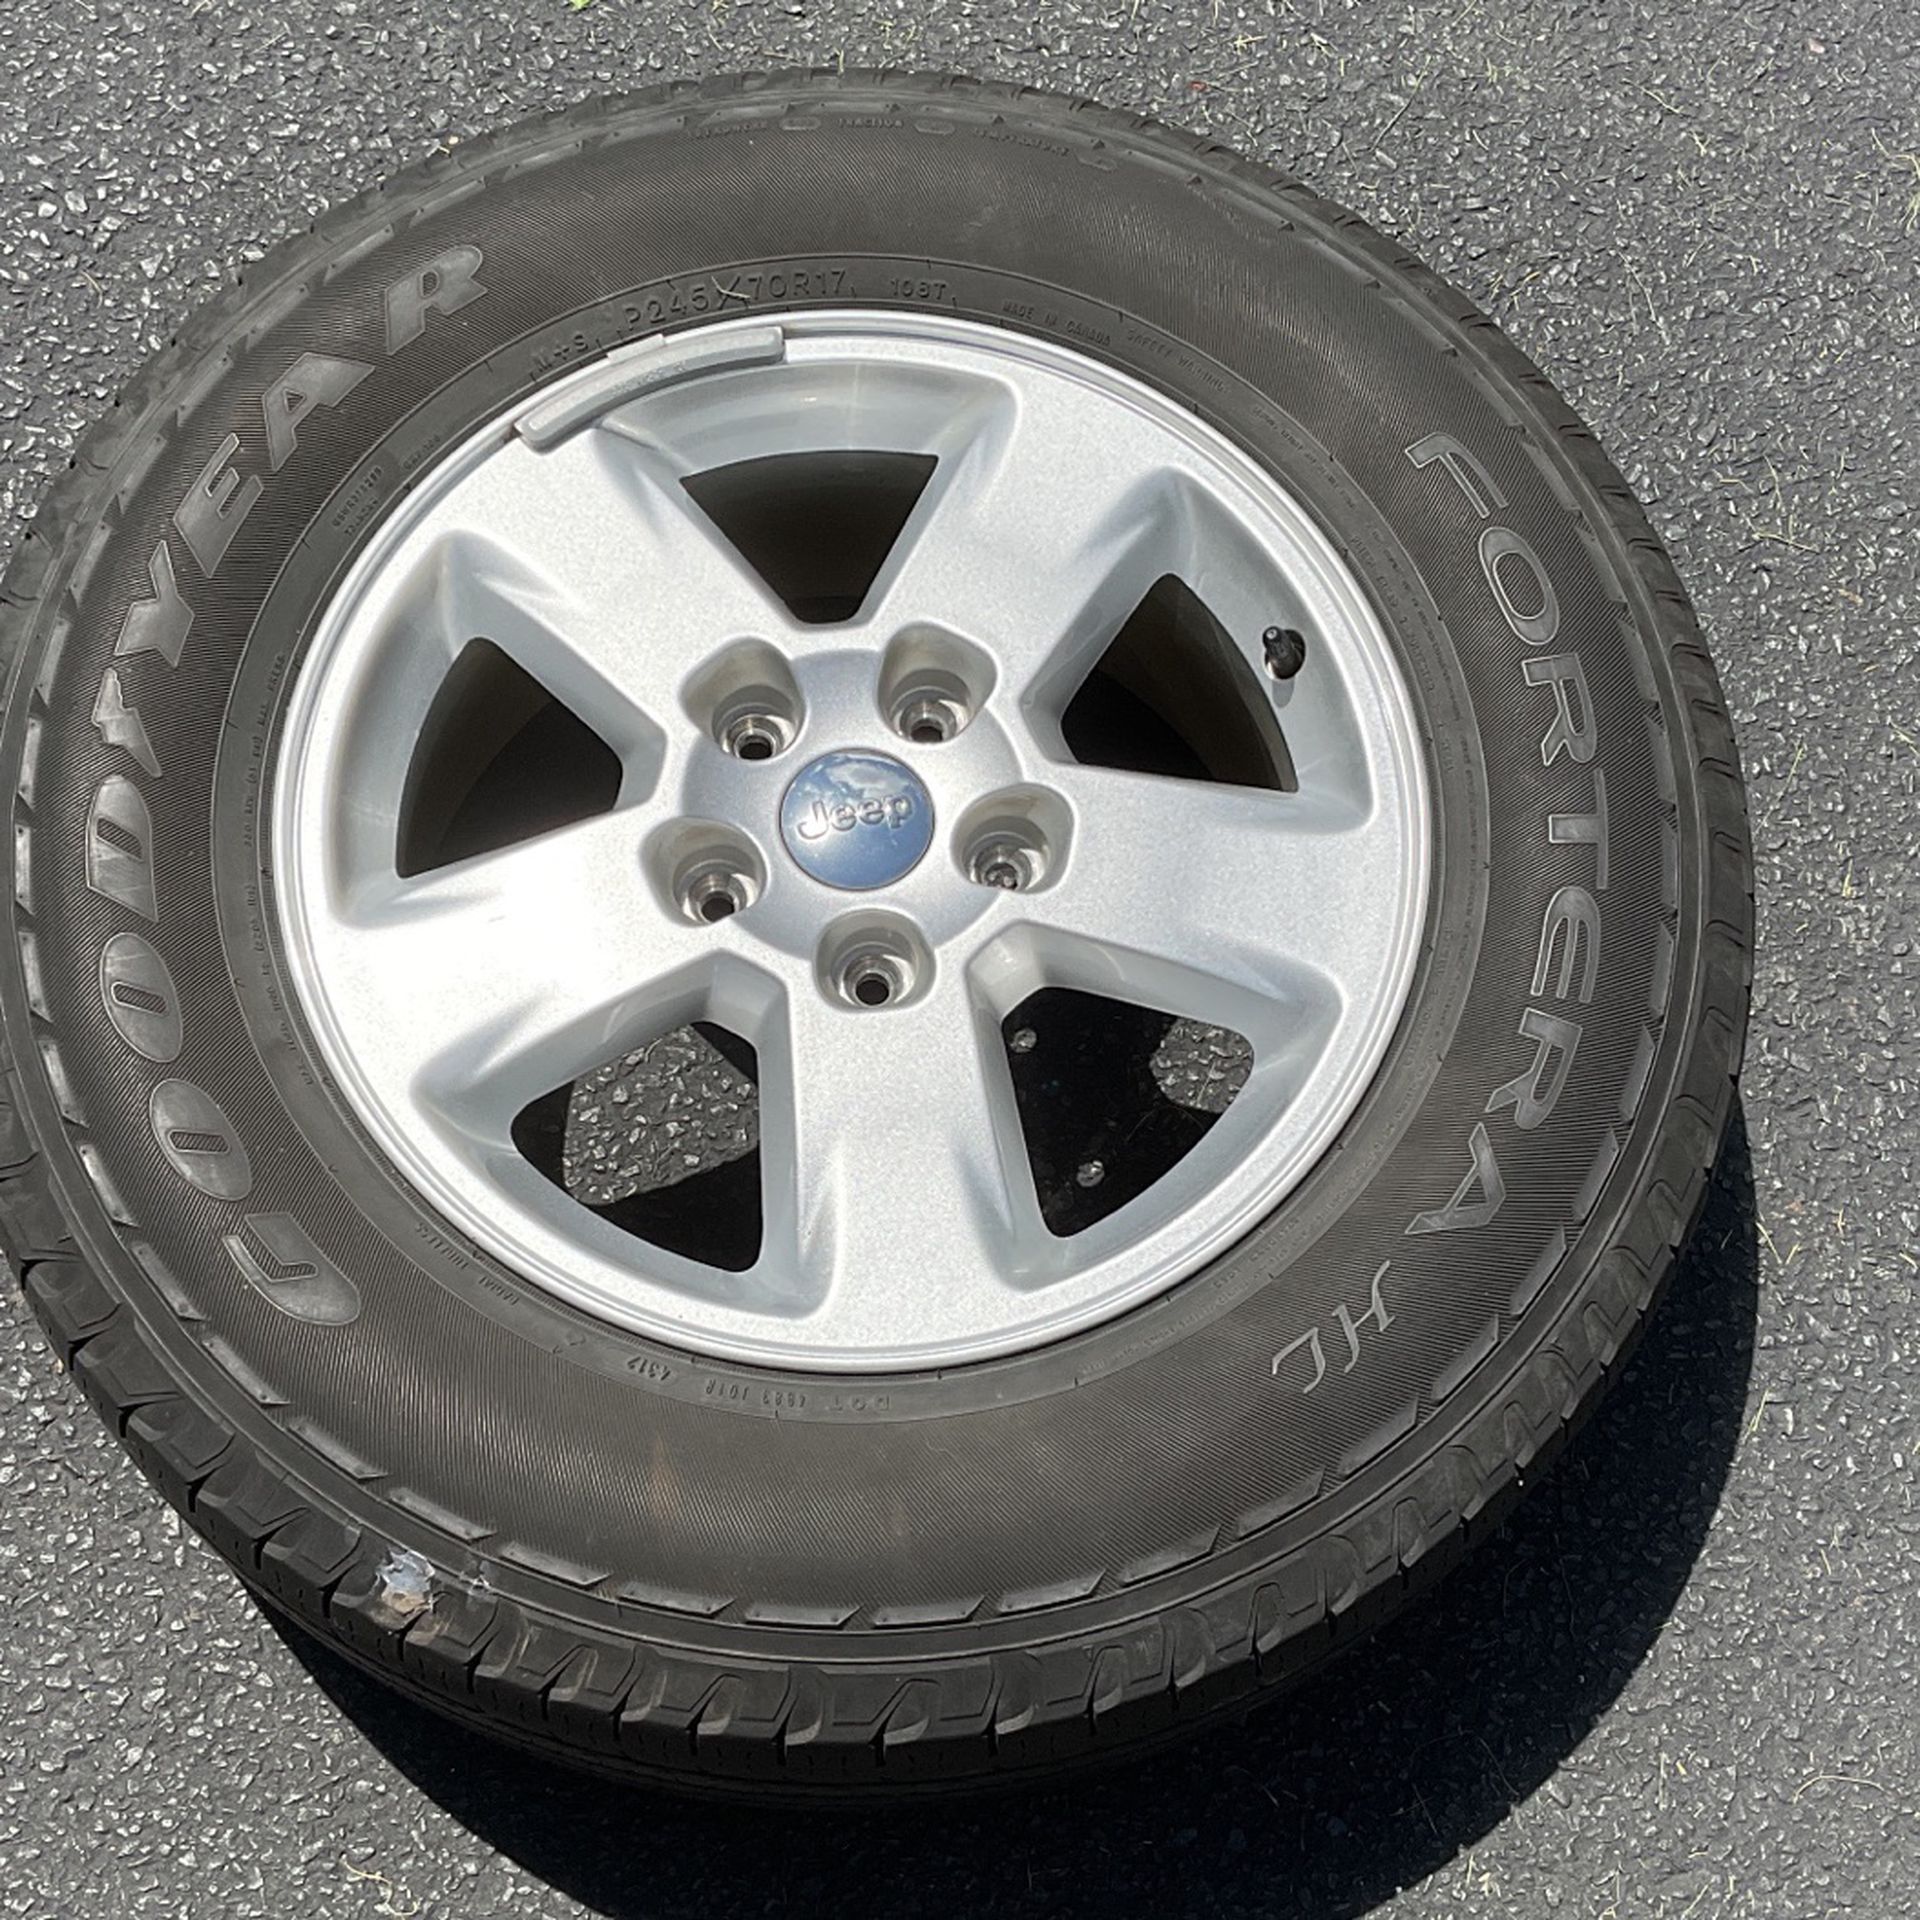 17 Inch Jeep Wheels And Tires Wheels Are Like NEW !! NO Gouges Or Scratches. ￼